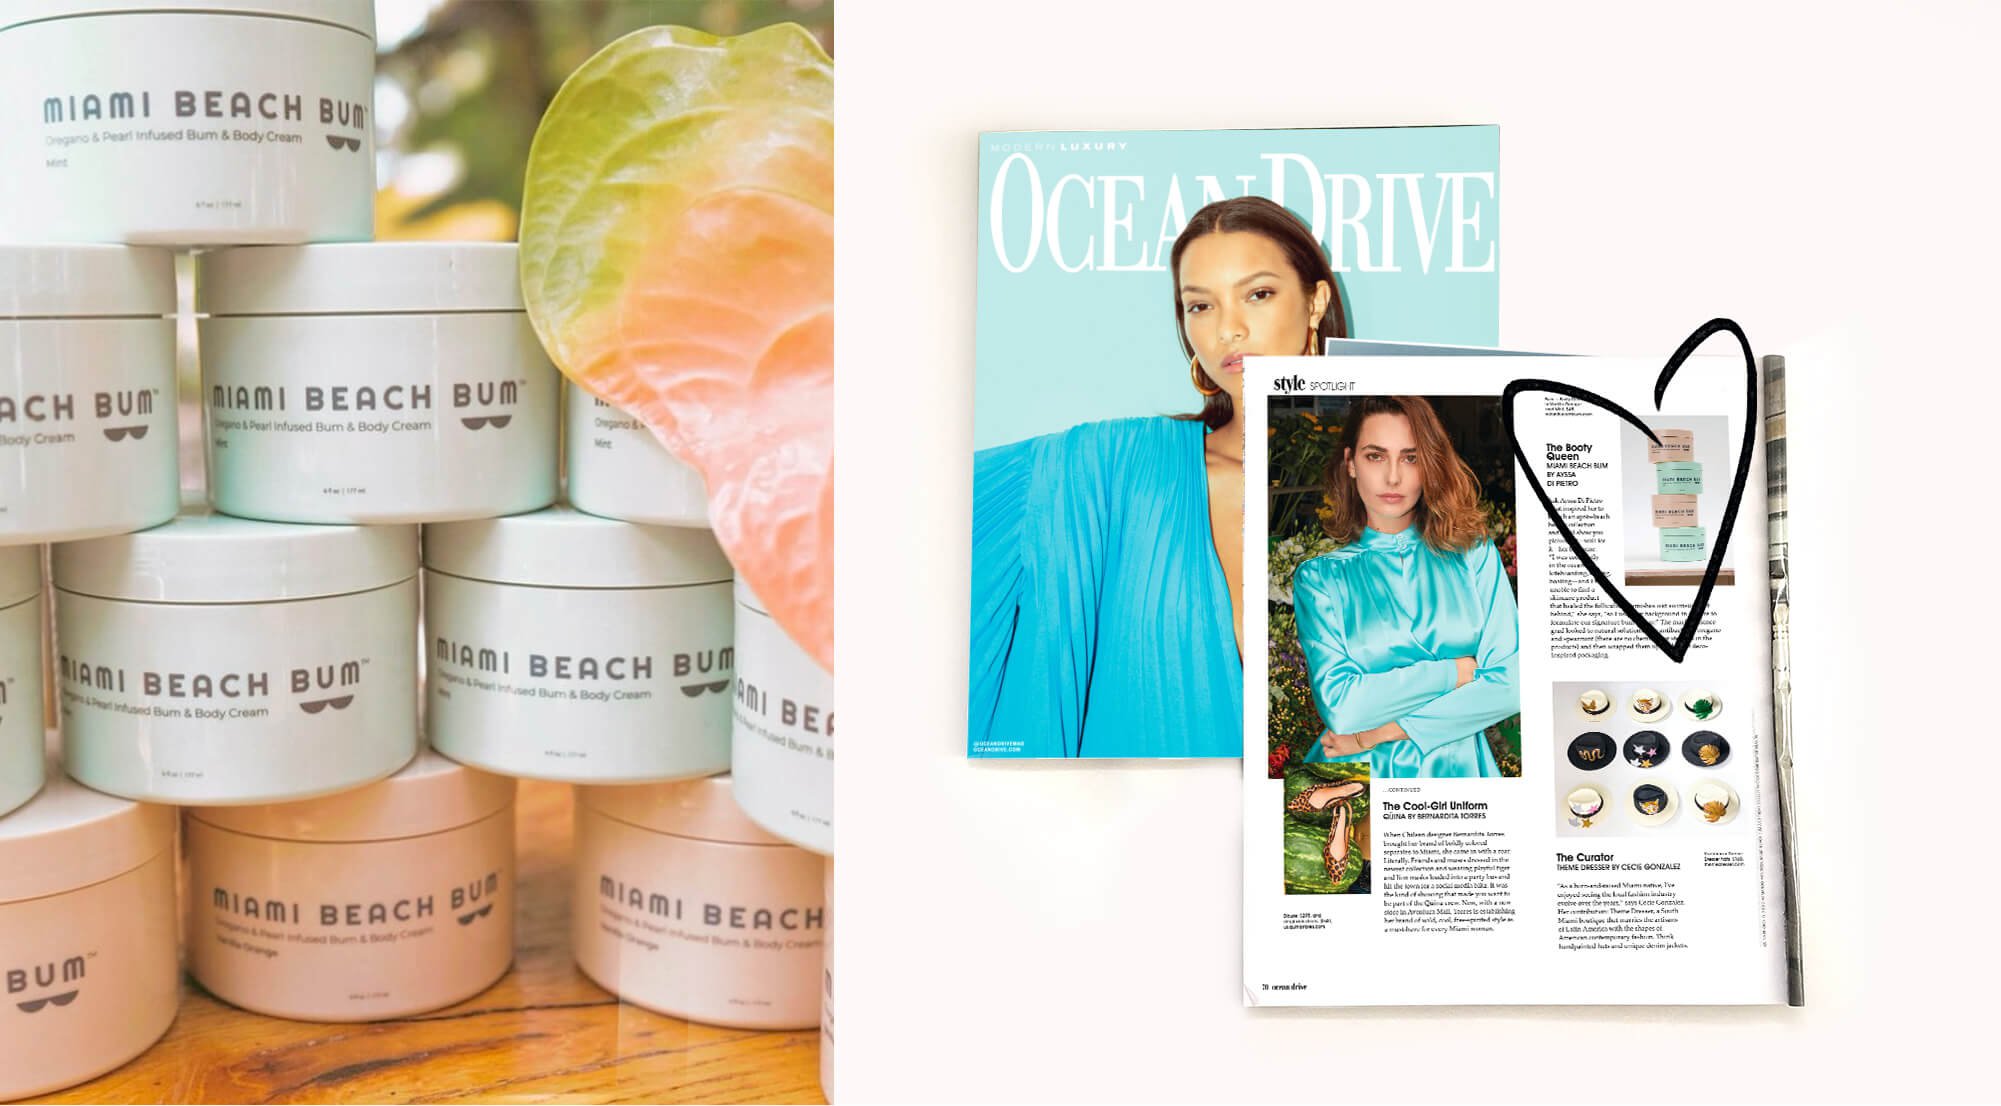 Jacober Creative Brand Identity for Miami beach Bum. Photo of packaging photography and a Press article in Ocean Drive.